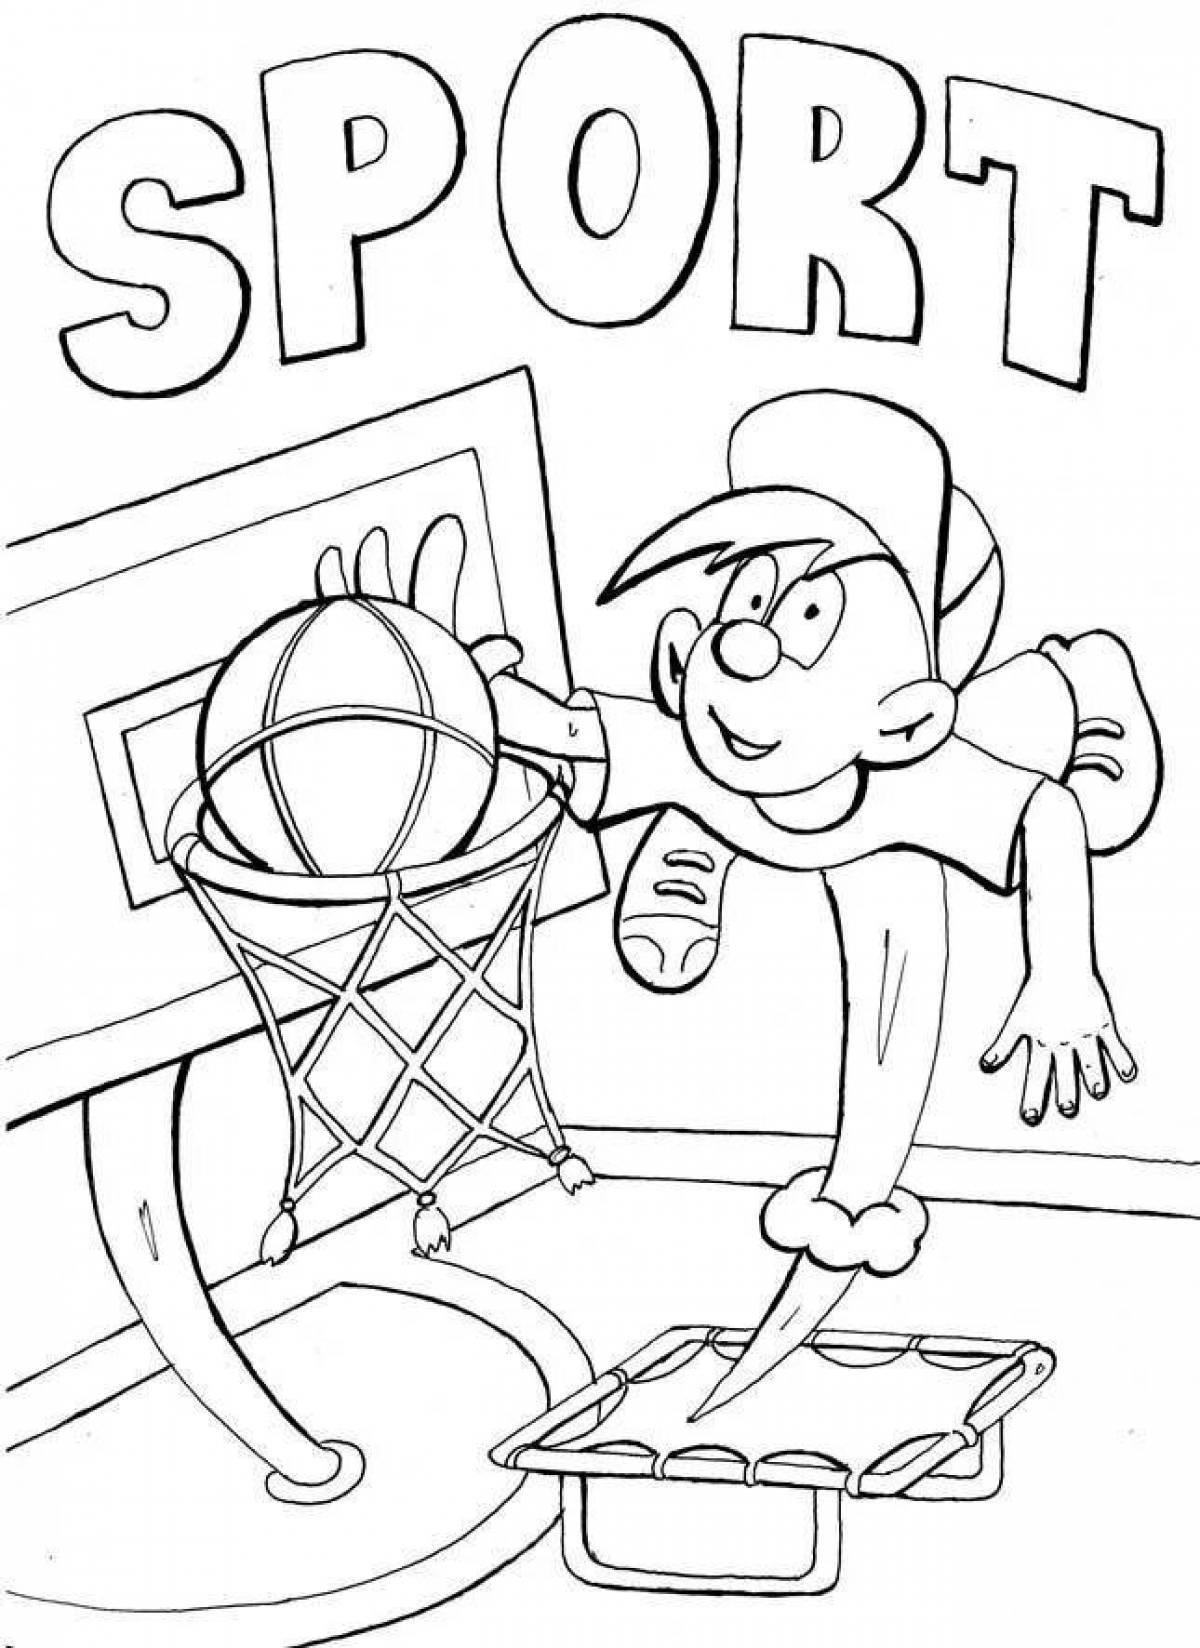 Peaceful lifestyle coloring page